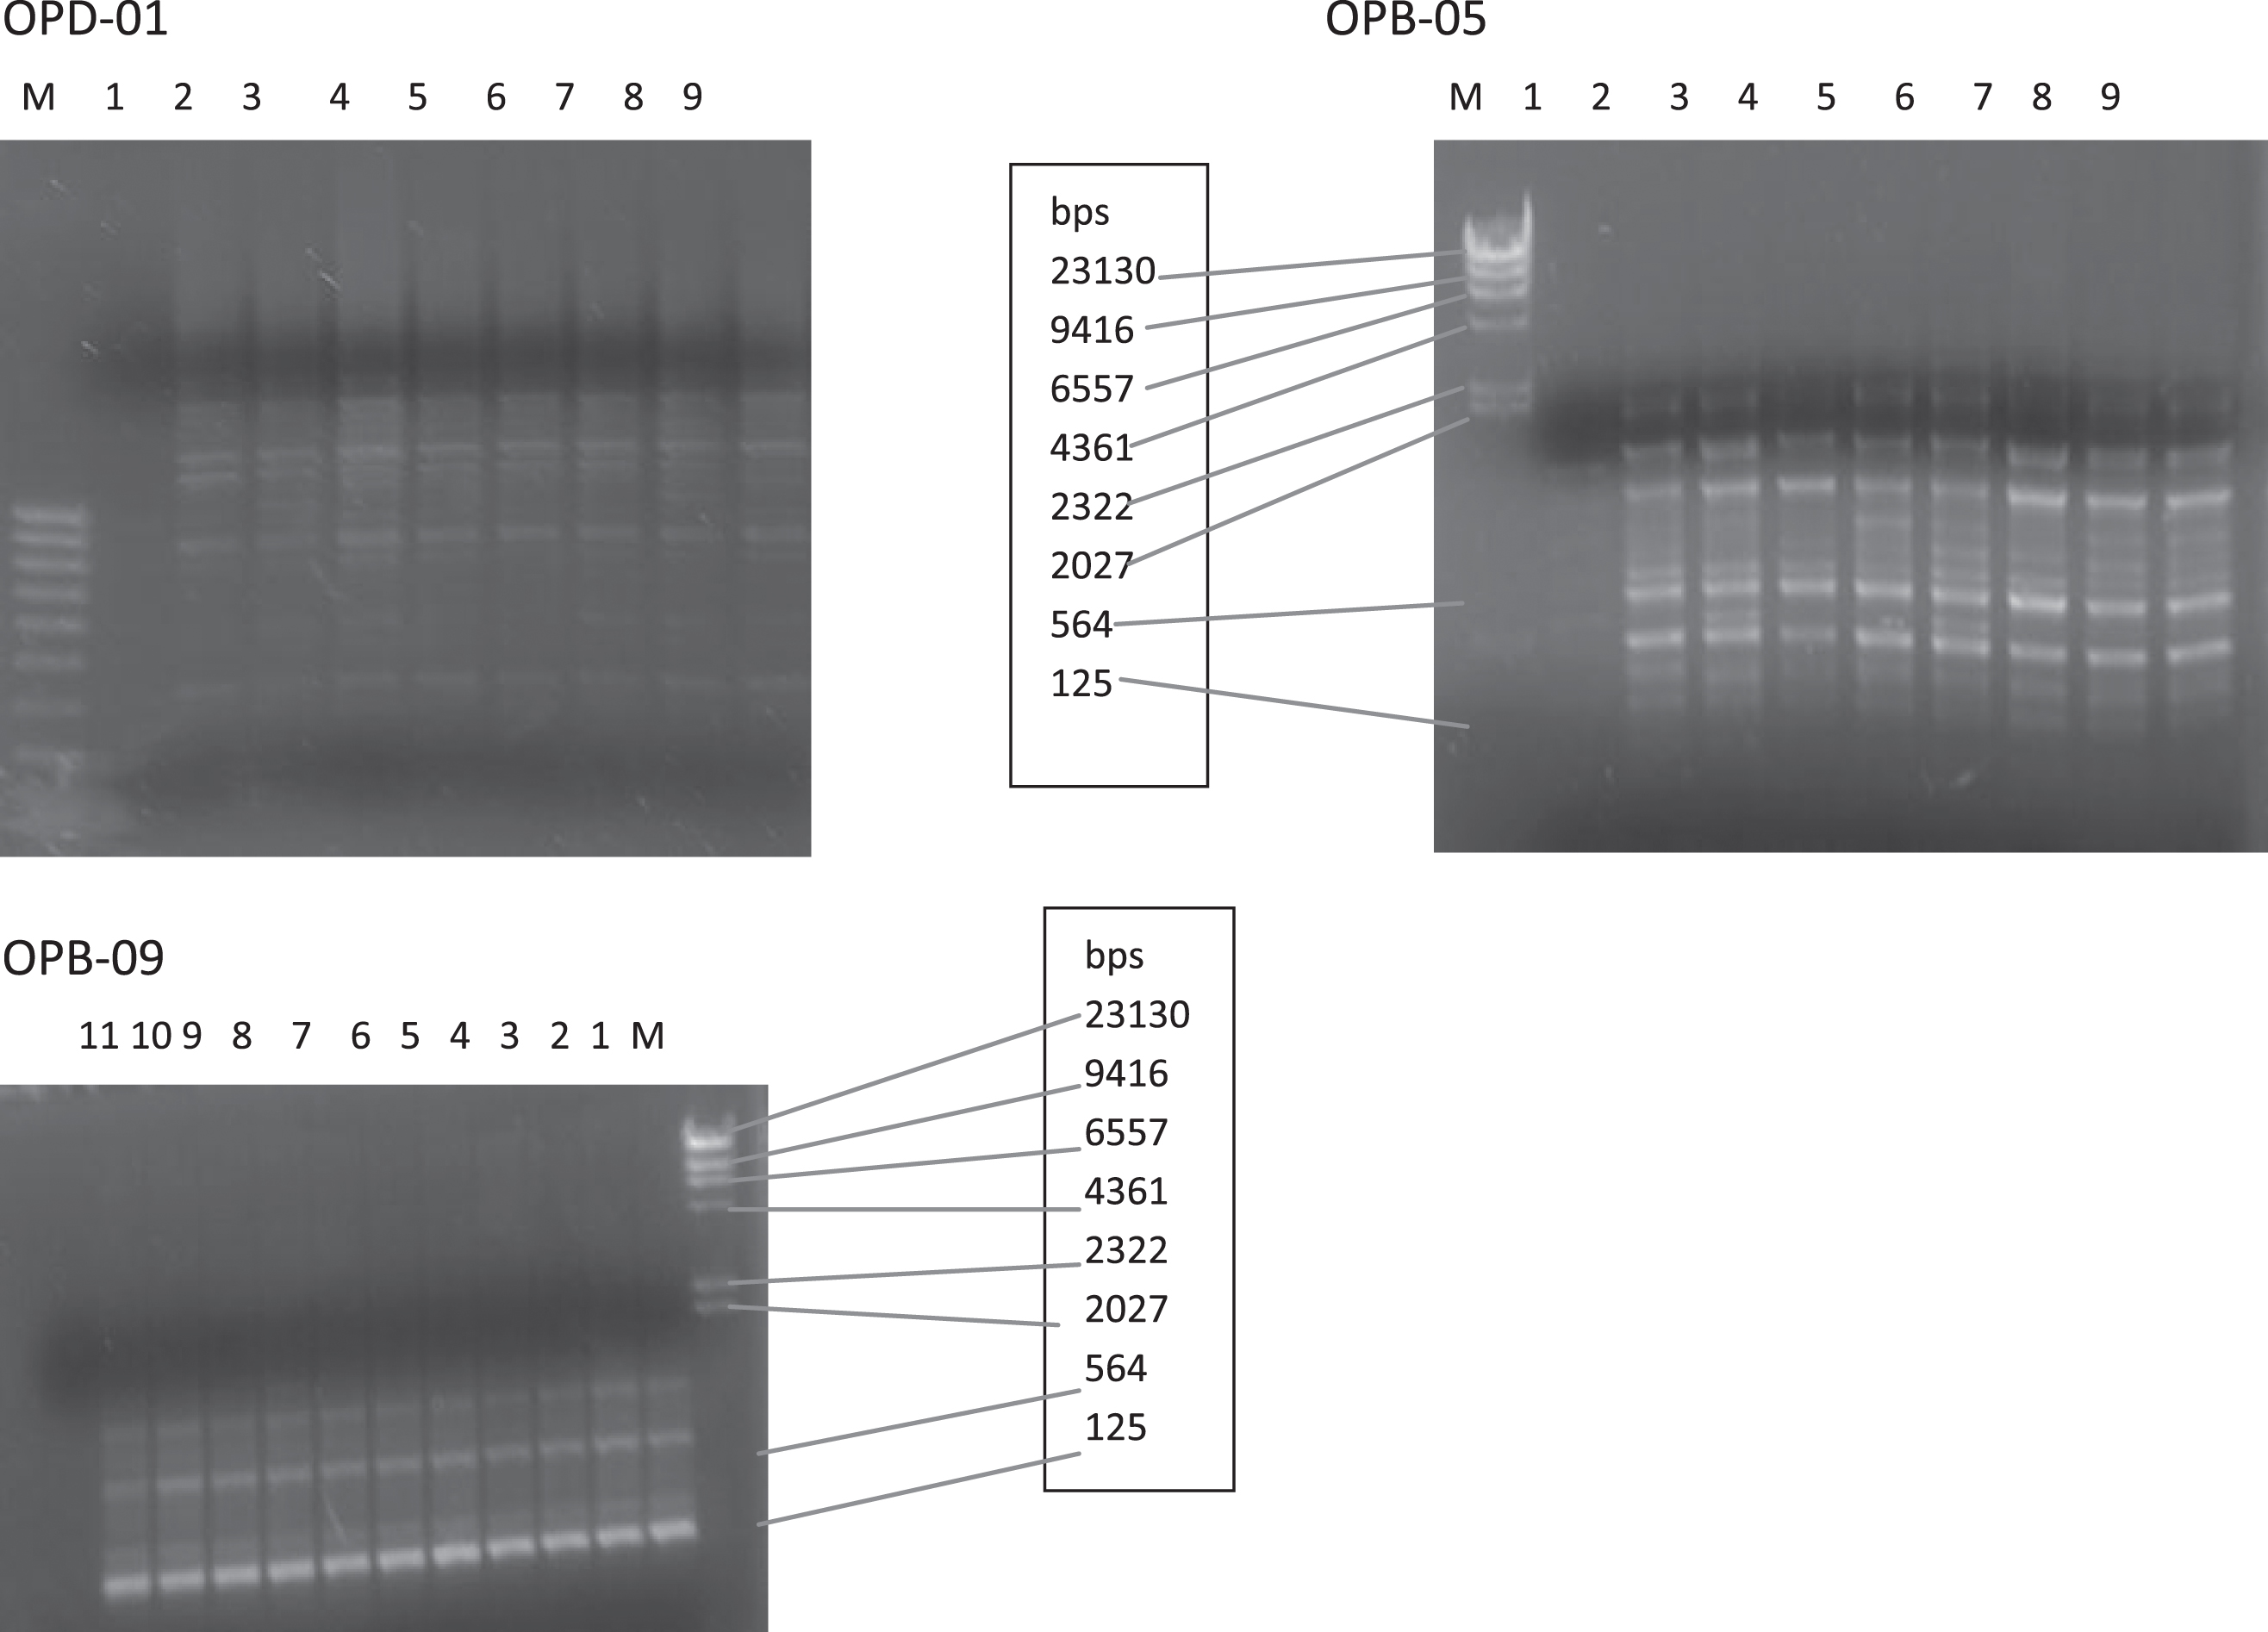 Agarose gel pictures showing monomorphic primers (OPD-01, OPB-09 and OPB-05).